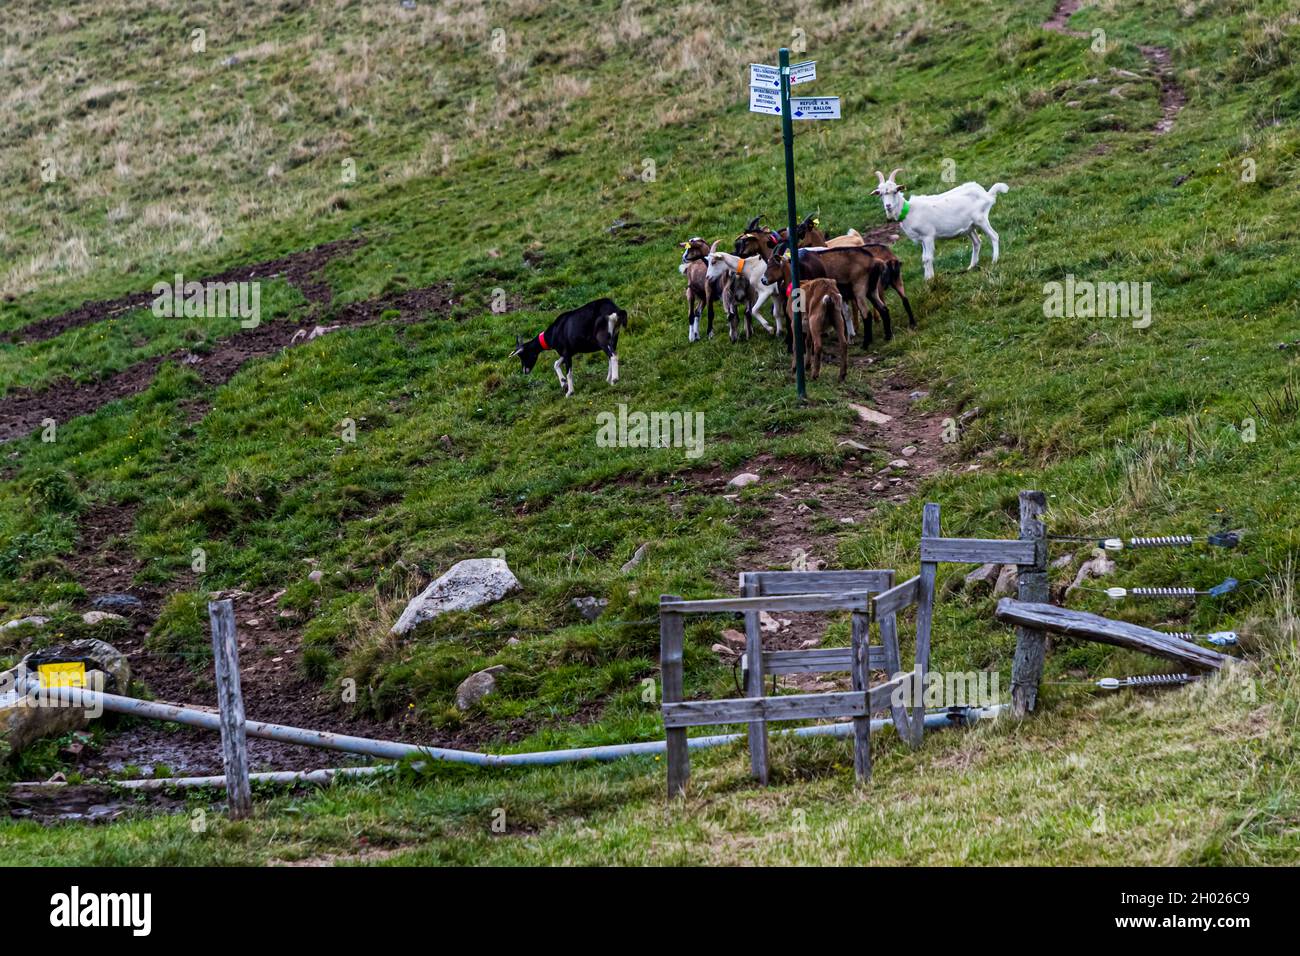 Goats at a barrier with hiking sign in the Vosges Mountains near Sondernach, France Stock Photo